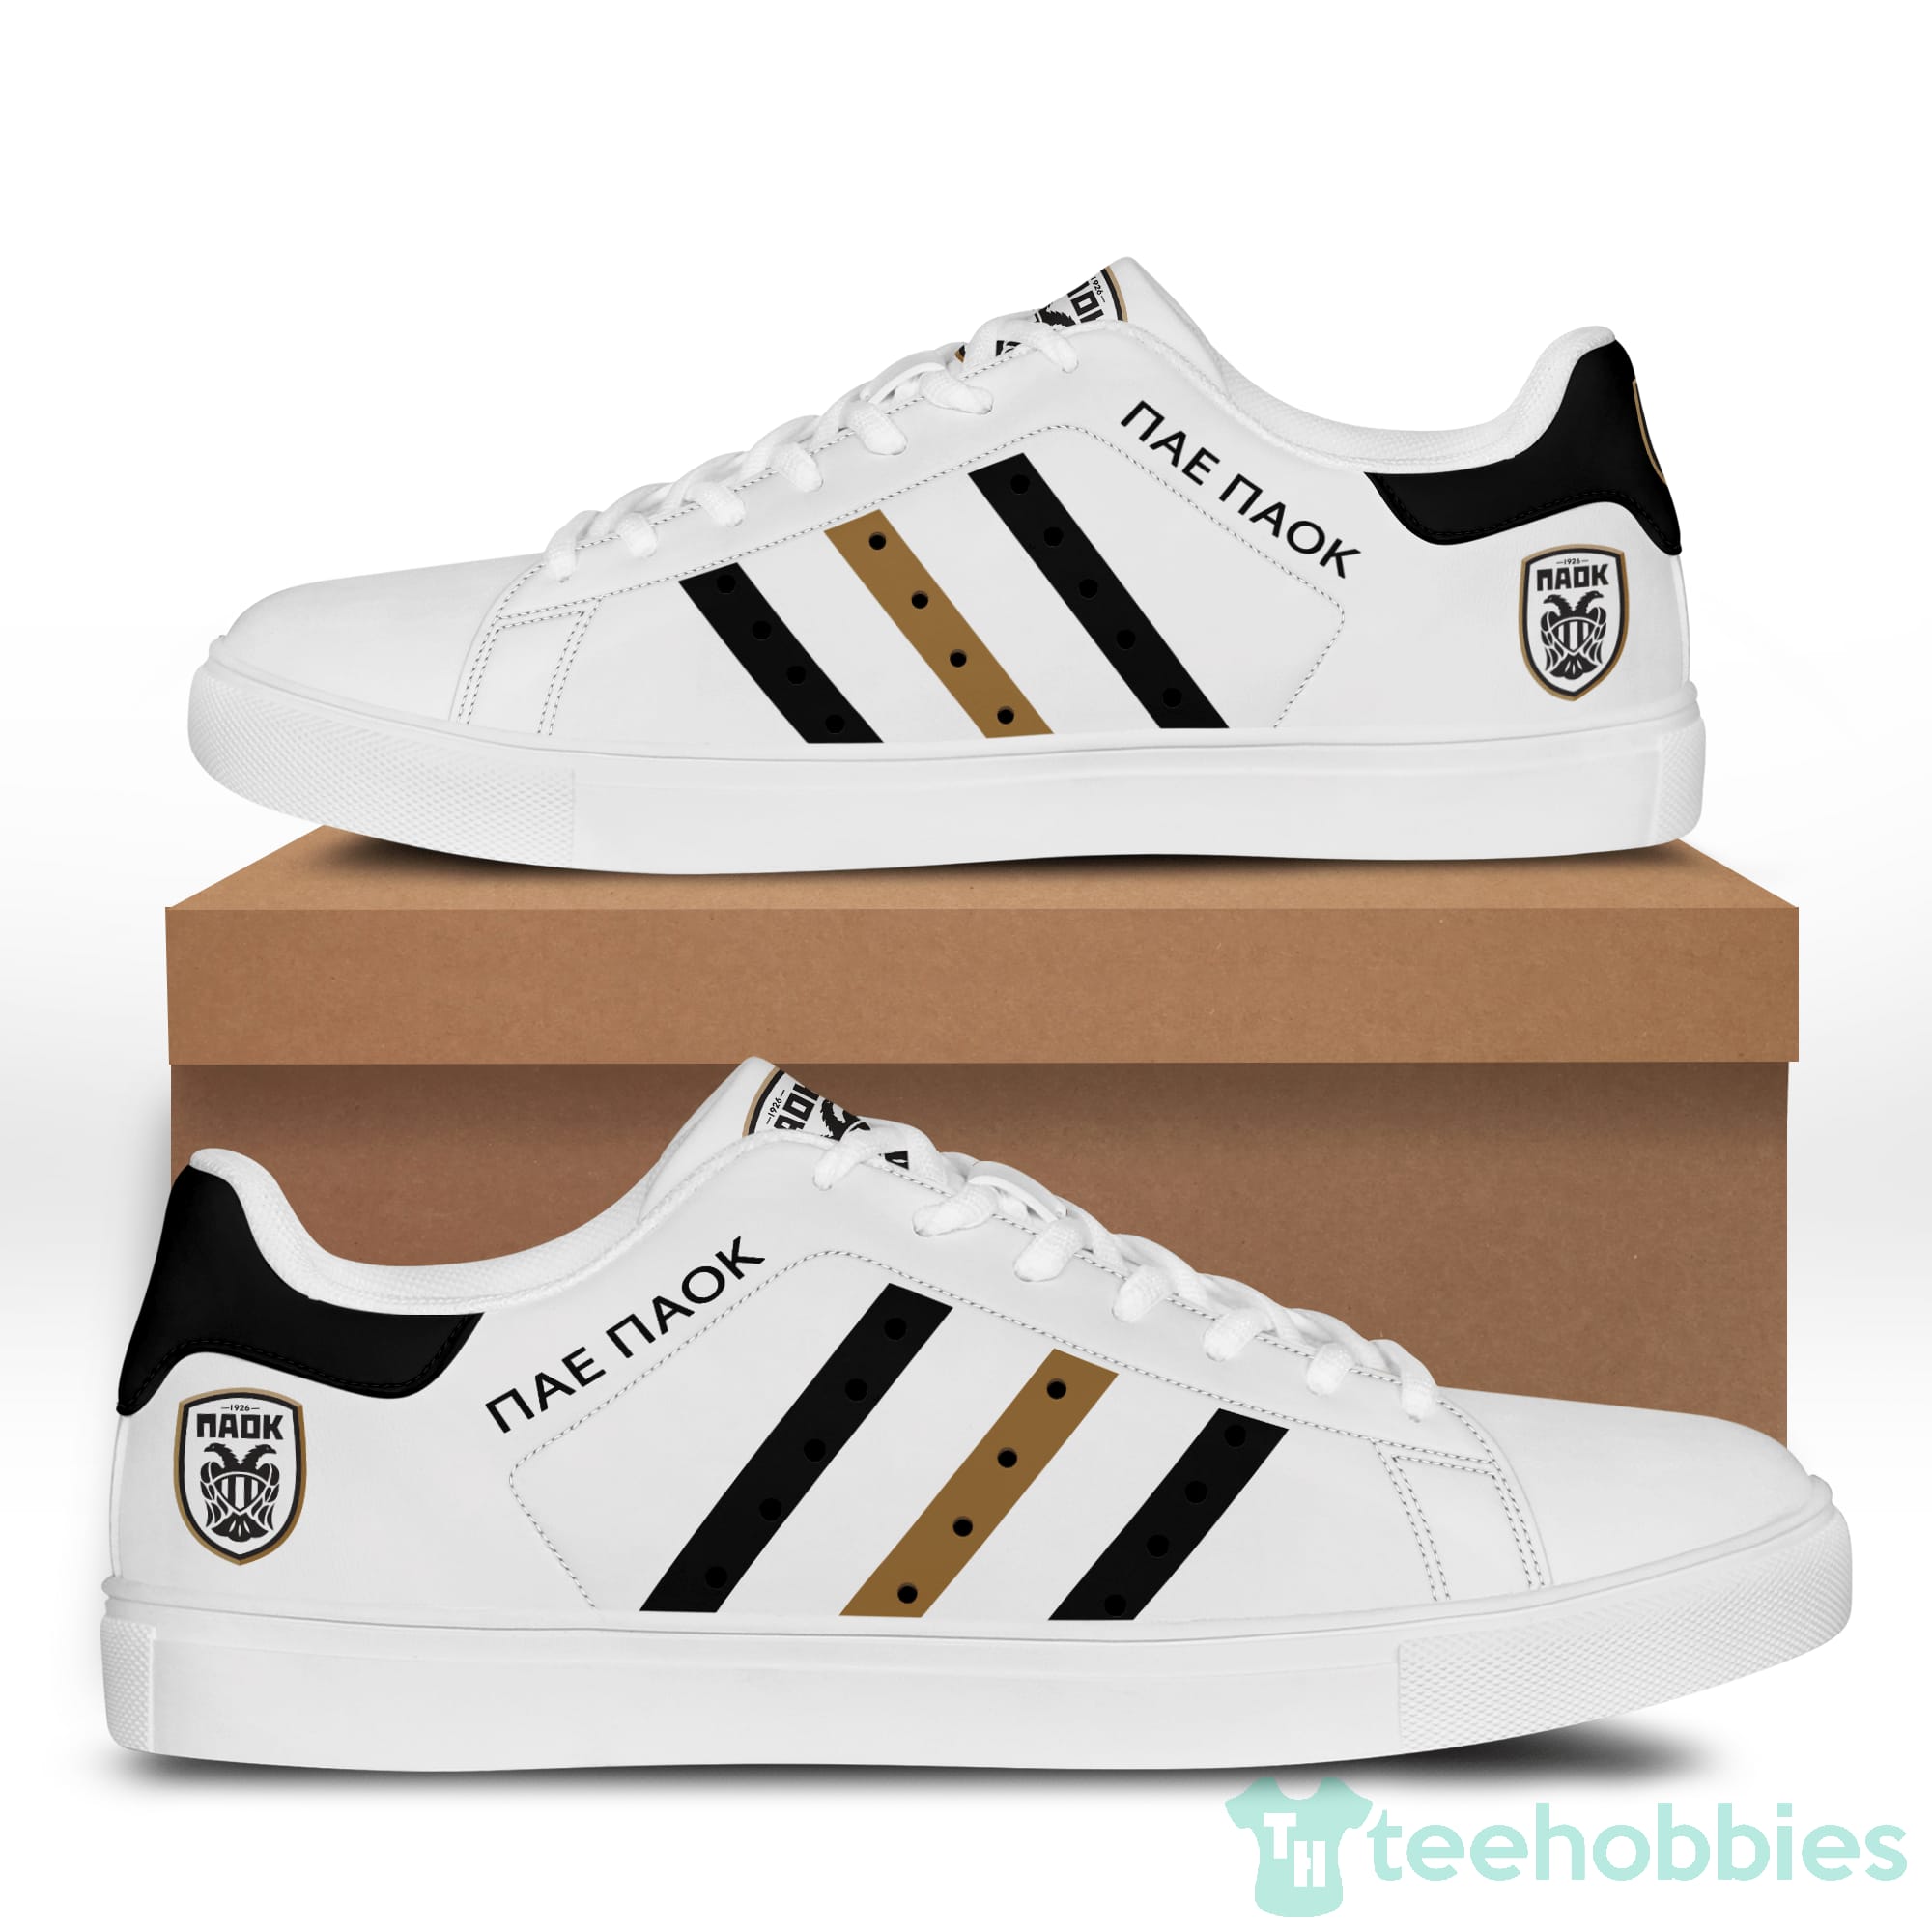 Nae Naok  Fc Low Top Skate Shoes Product photo 1